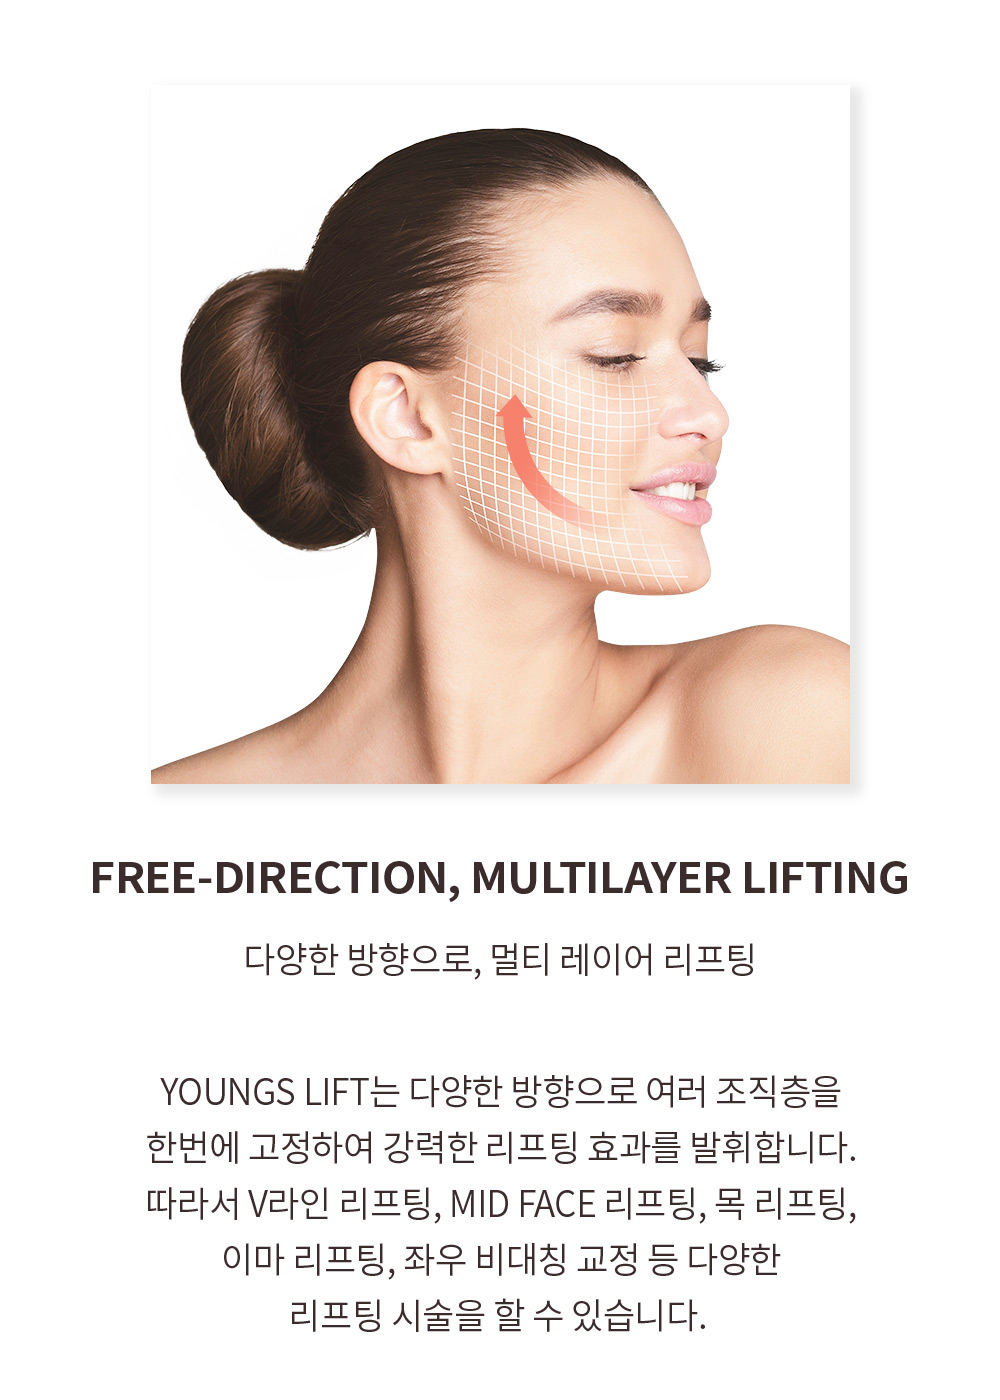 FREE-DIRECTION, MULTILAYER LIFTING